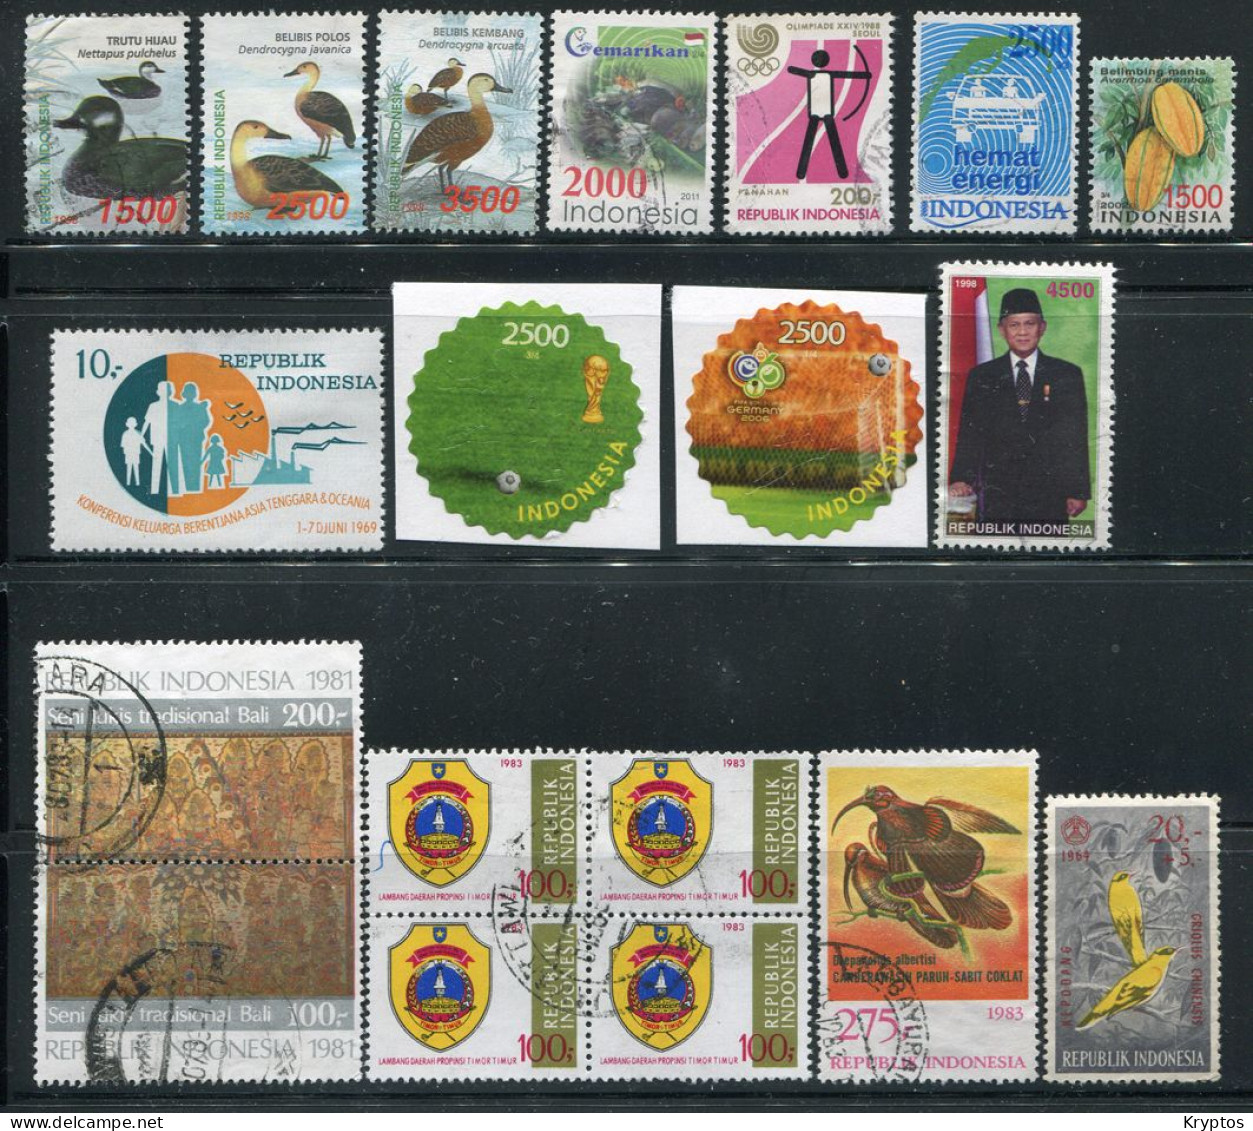 Indonesia. Collection of 12 PAGES! Mixed condition. OFFER